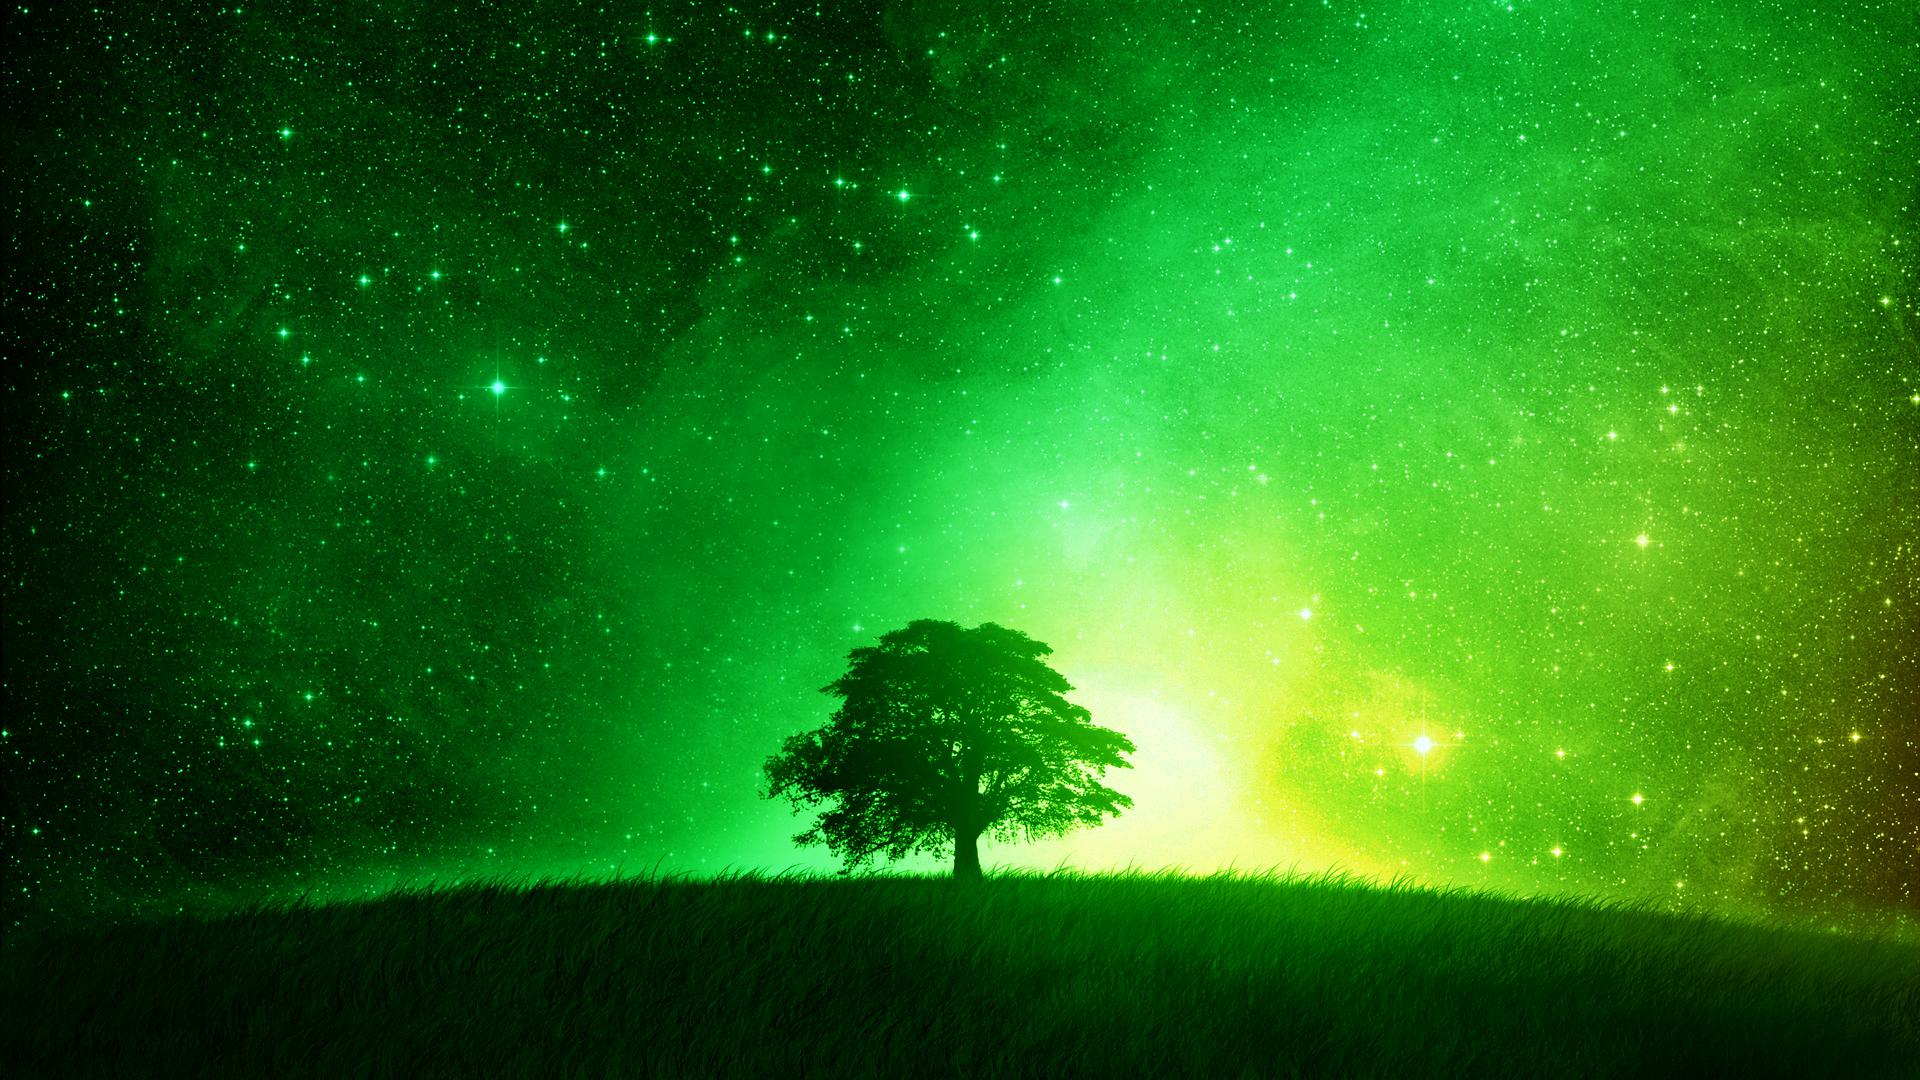 A lone tree on top of the hill with stars - Lime green